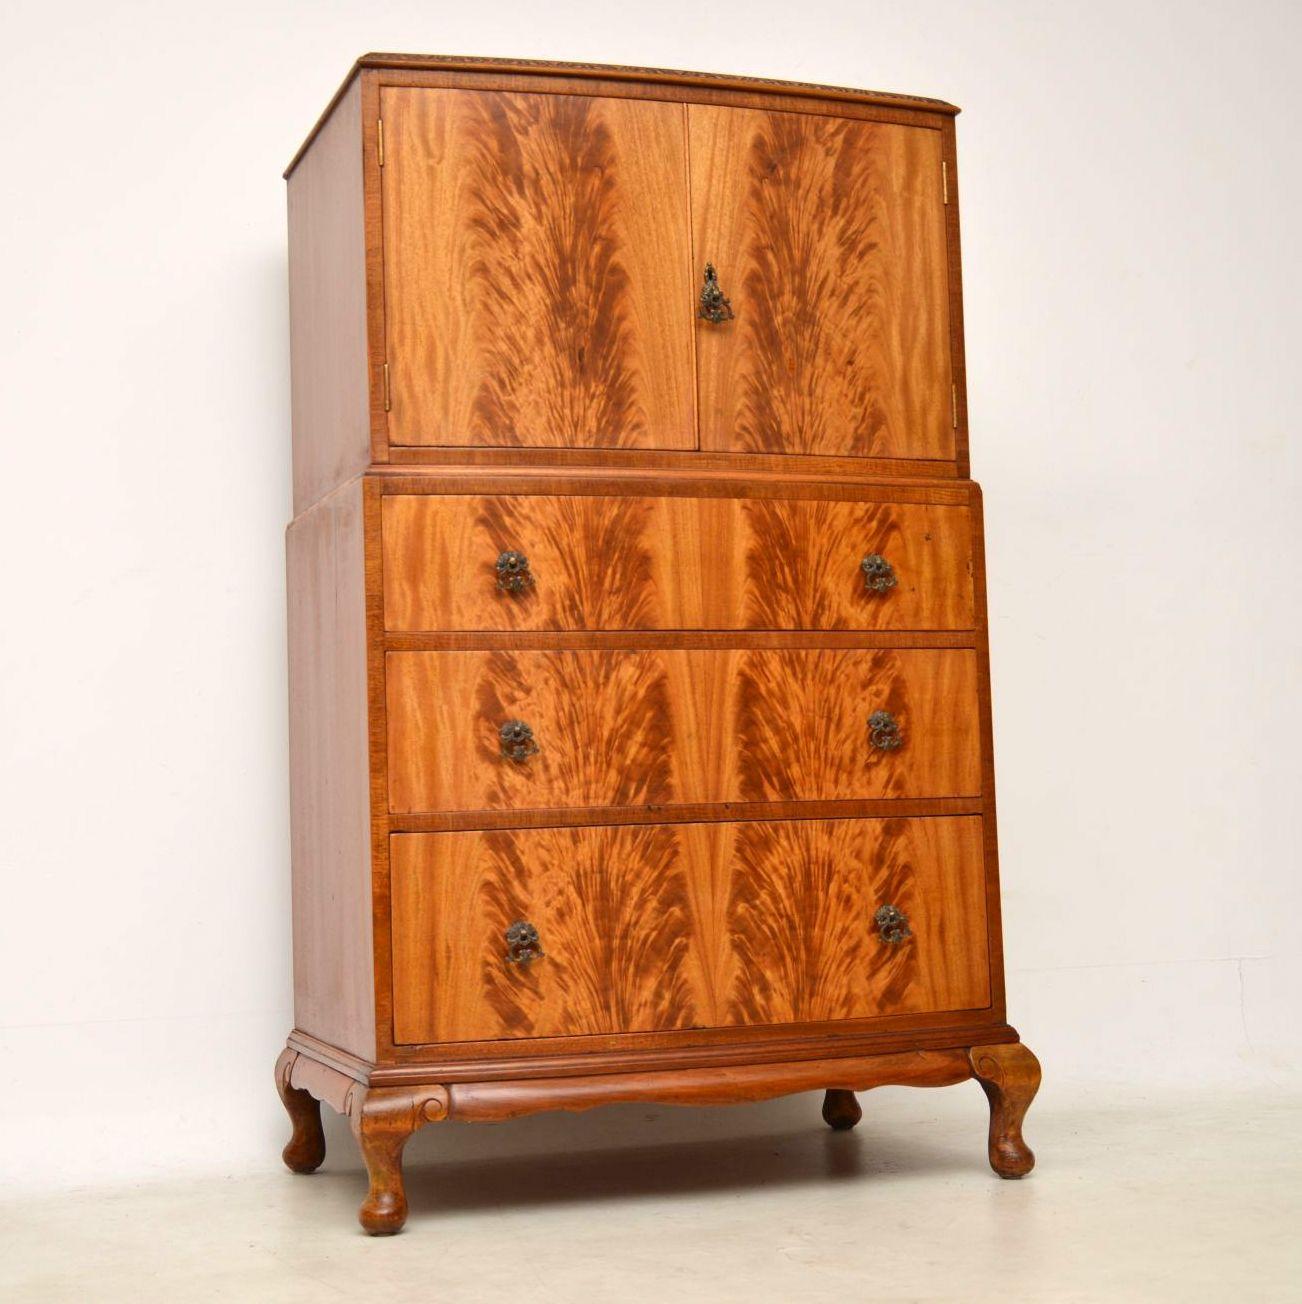 This antique cupboard on chest has some stunning flame mahogany veneers giving it a very striking pattern especially on the front and the top also has some interesting figuring. This piece is bow fronted, with a carved top edge, two top cupboards,